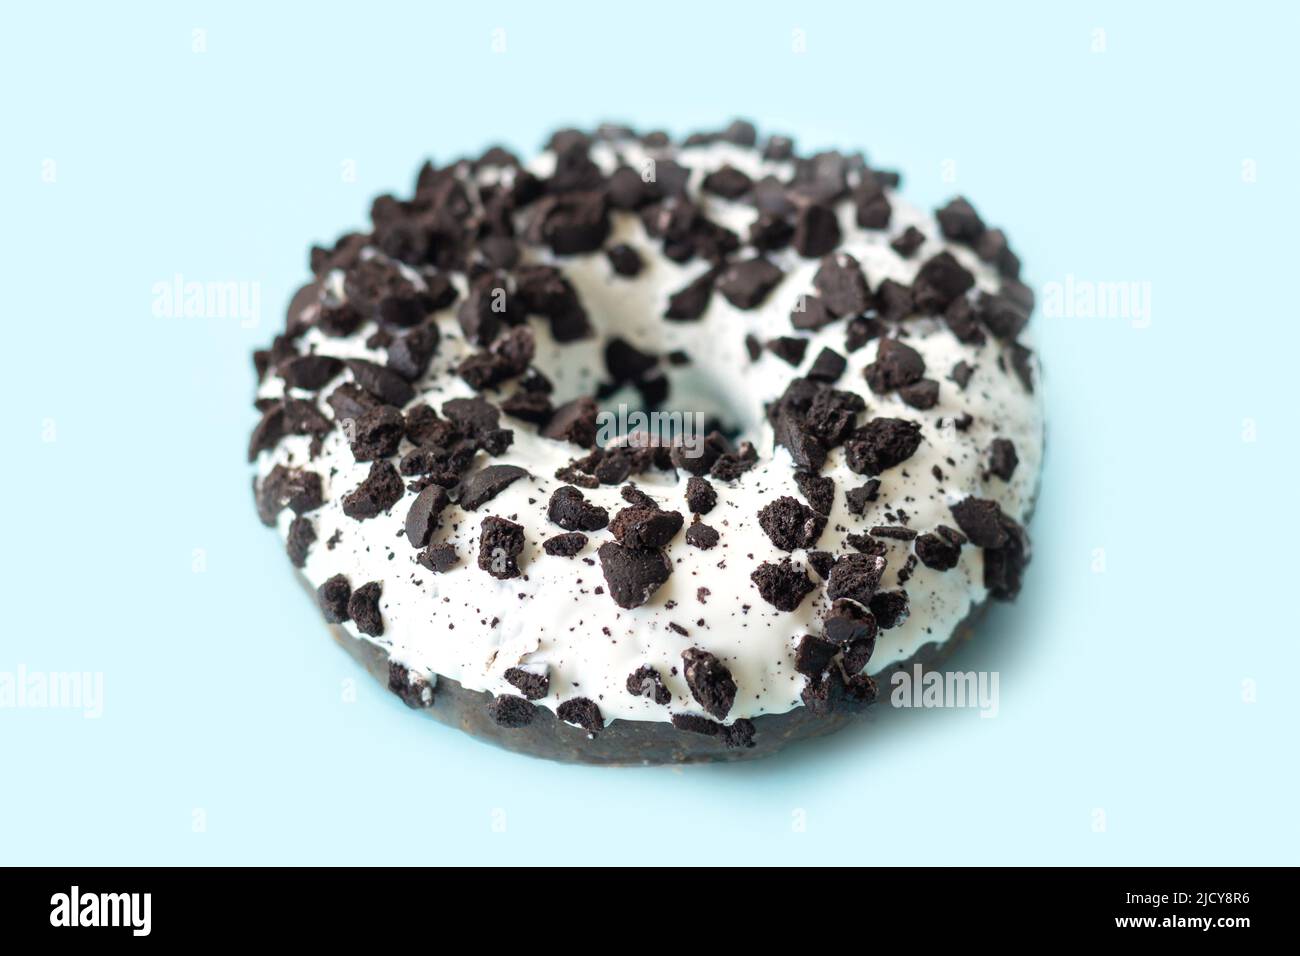 Tasty white chocolate glazed donut with dark cookies crumbs on light blue background Stock Photo